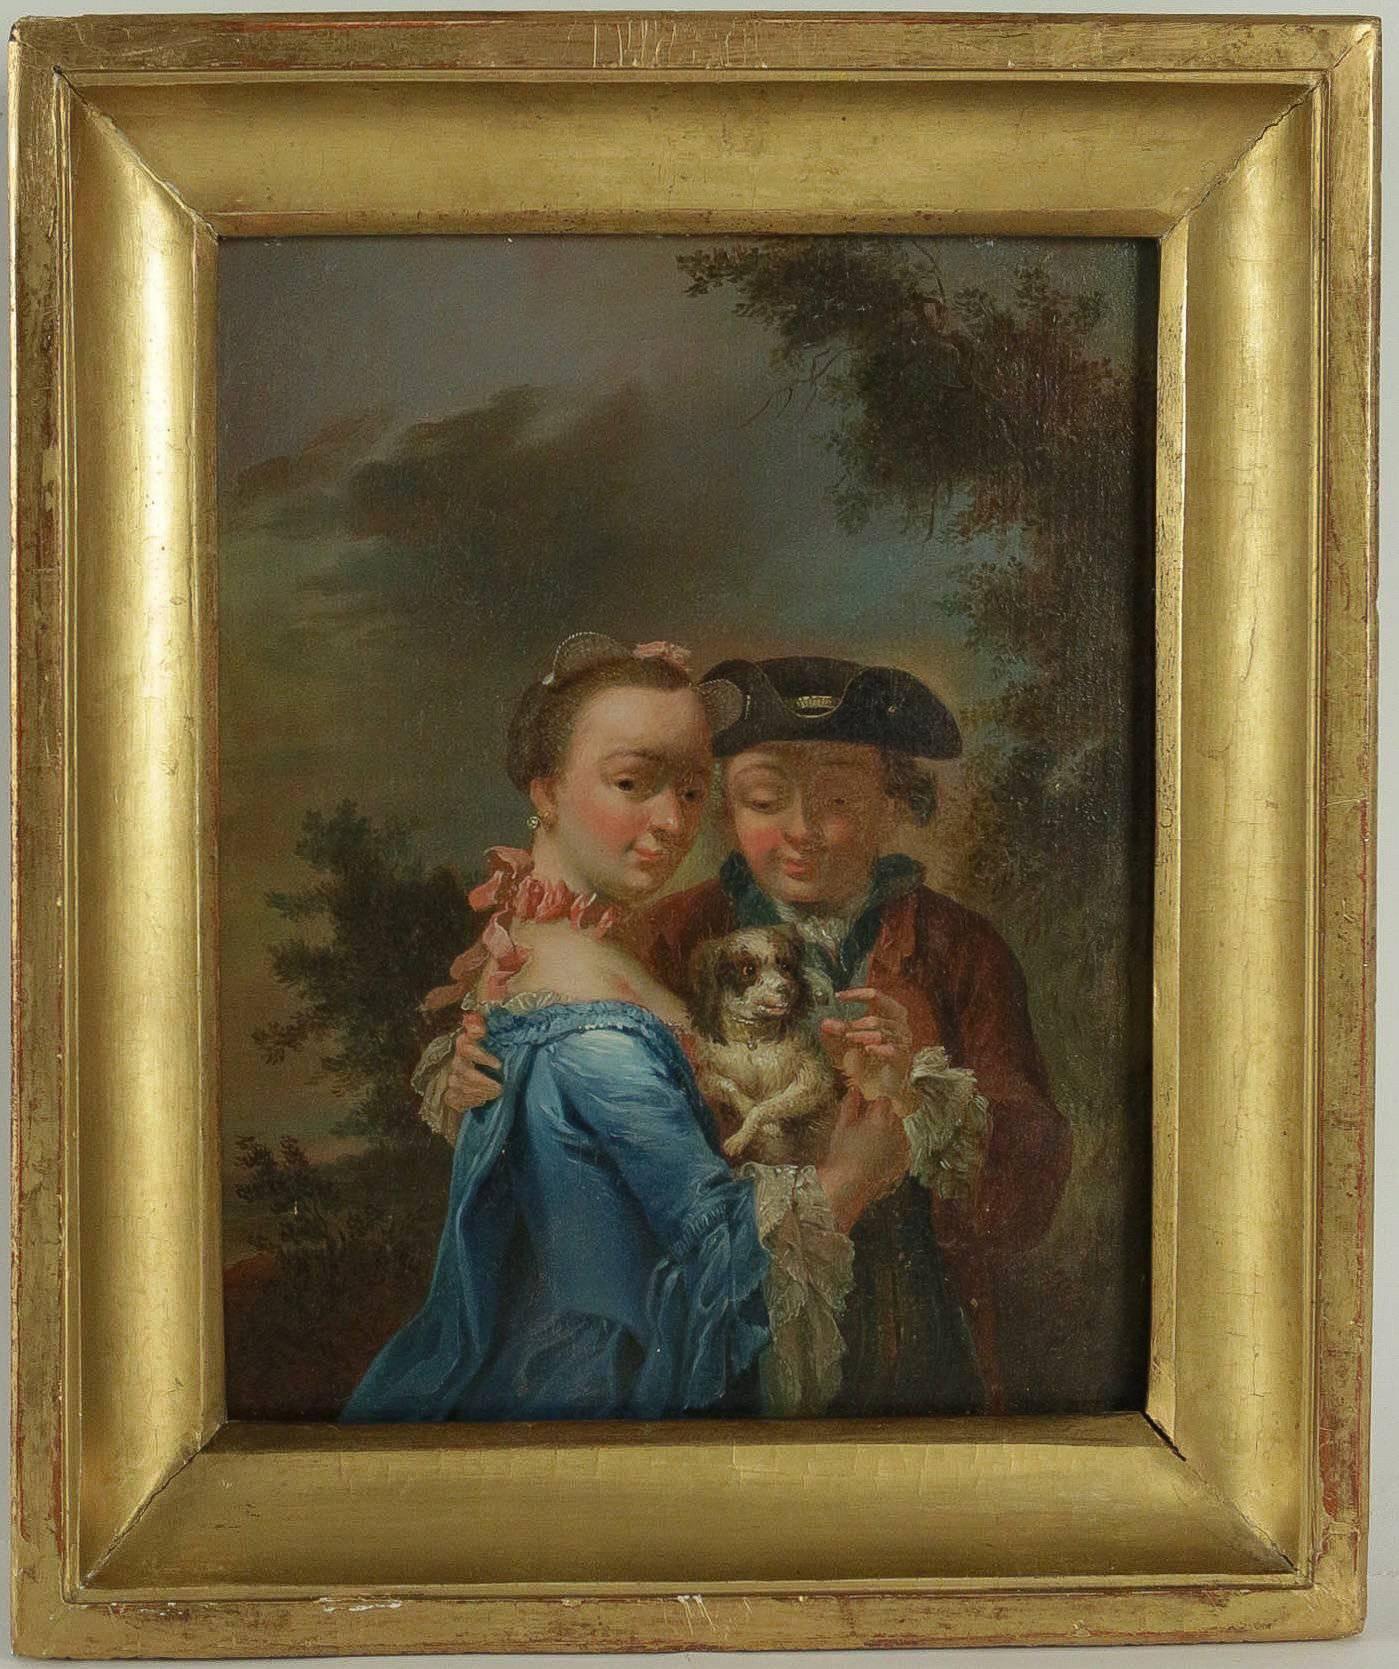 We are pleased to present you a lovely and decorative oil on panel in his original giltwood frame, attributed to Johann Conrad Seekatz, depicts A Couple with a Dog in a Landscape, Germany mid-18th century.

Beautiful German work, from London